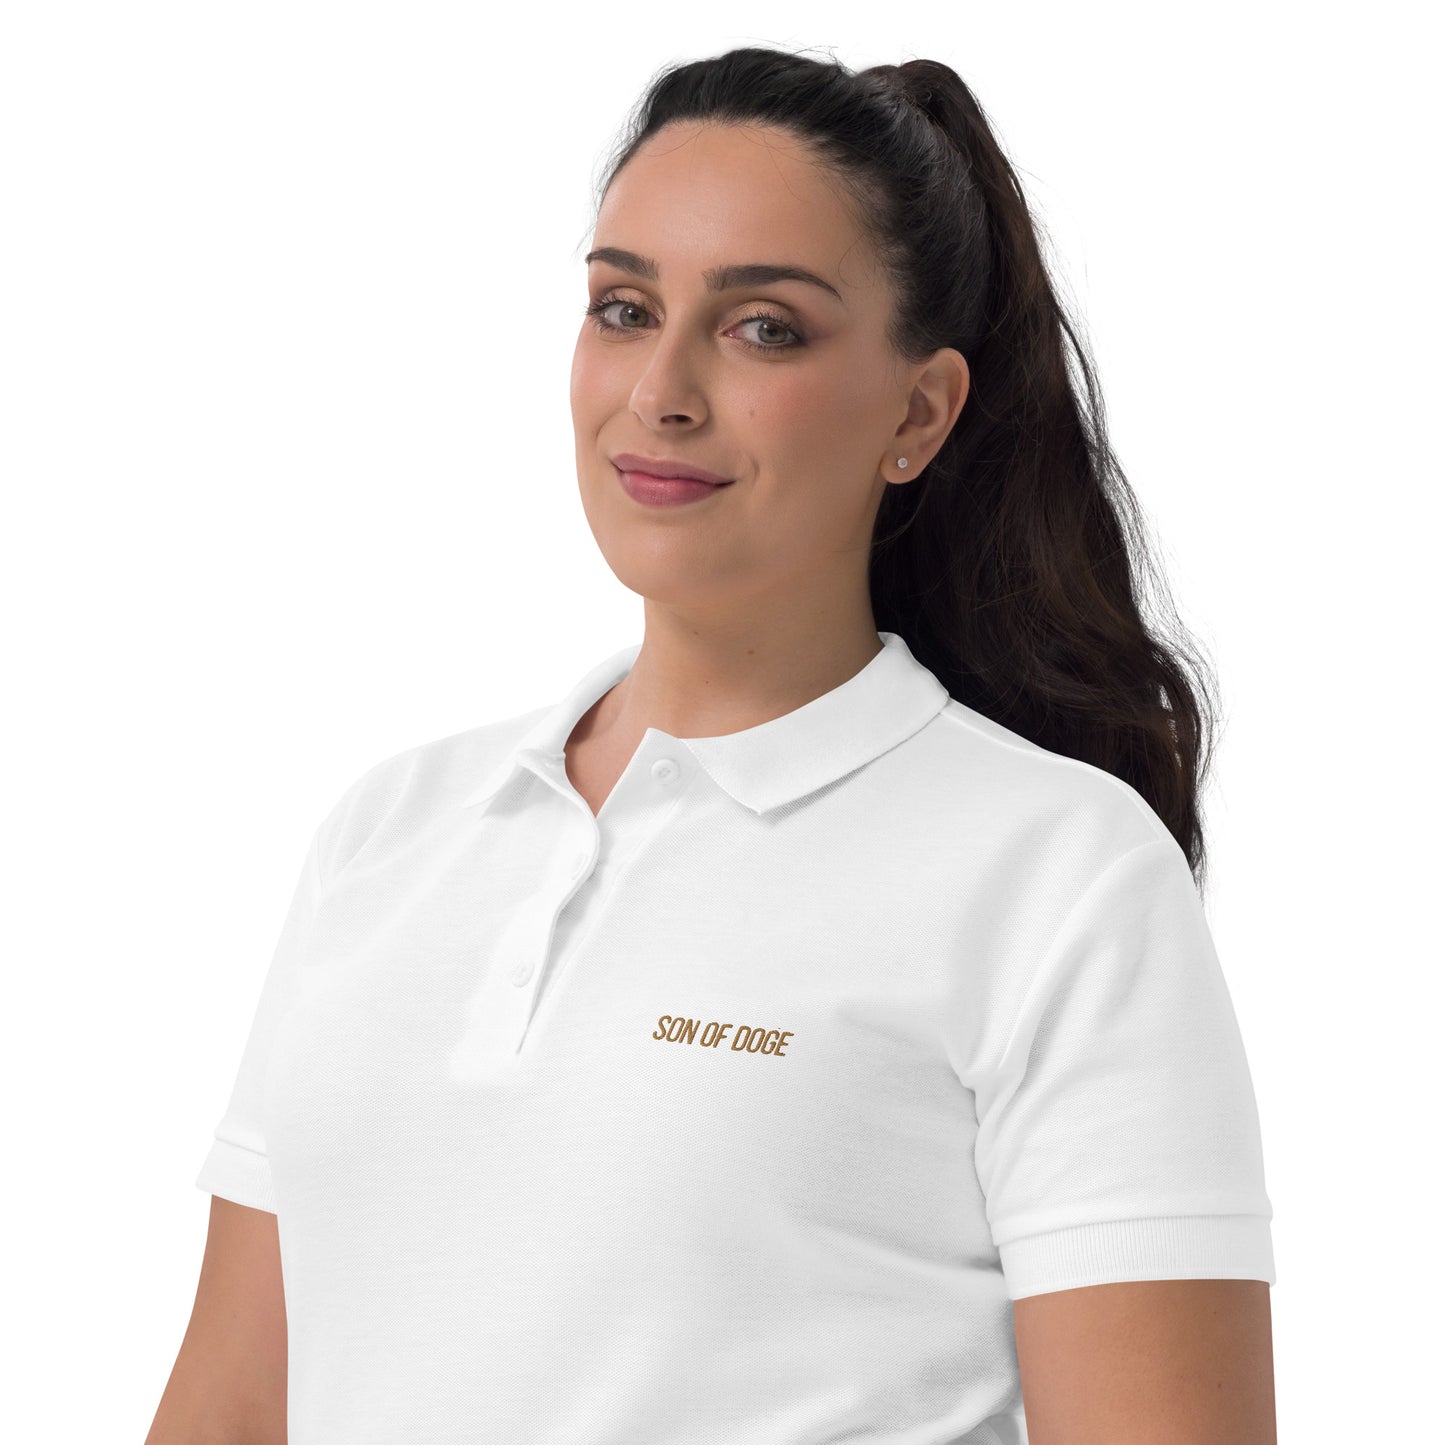 Son Of Doge Women's Embroidered Polo Shirt